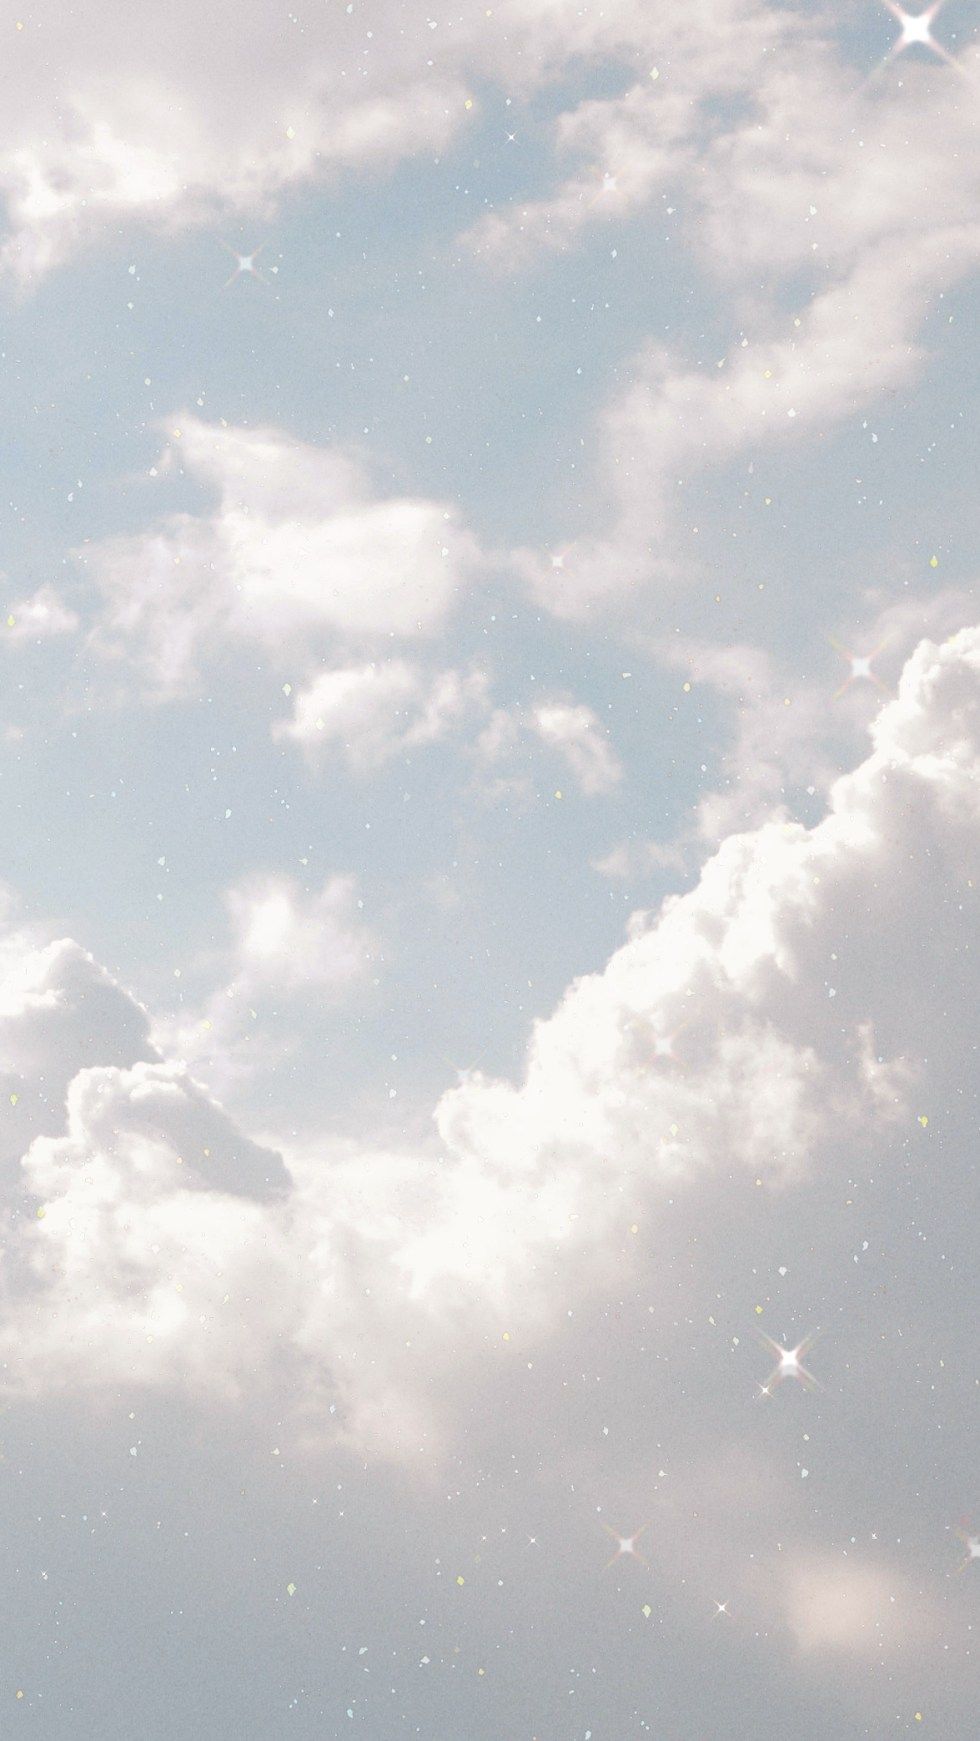 Aesthetic wallpaper of a cloudy sky with stars. - Phone